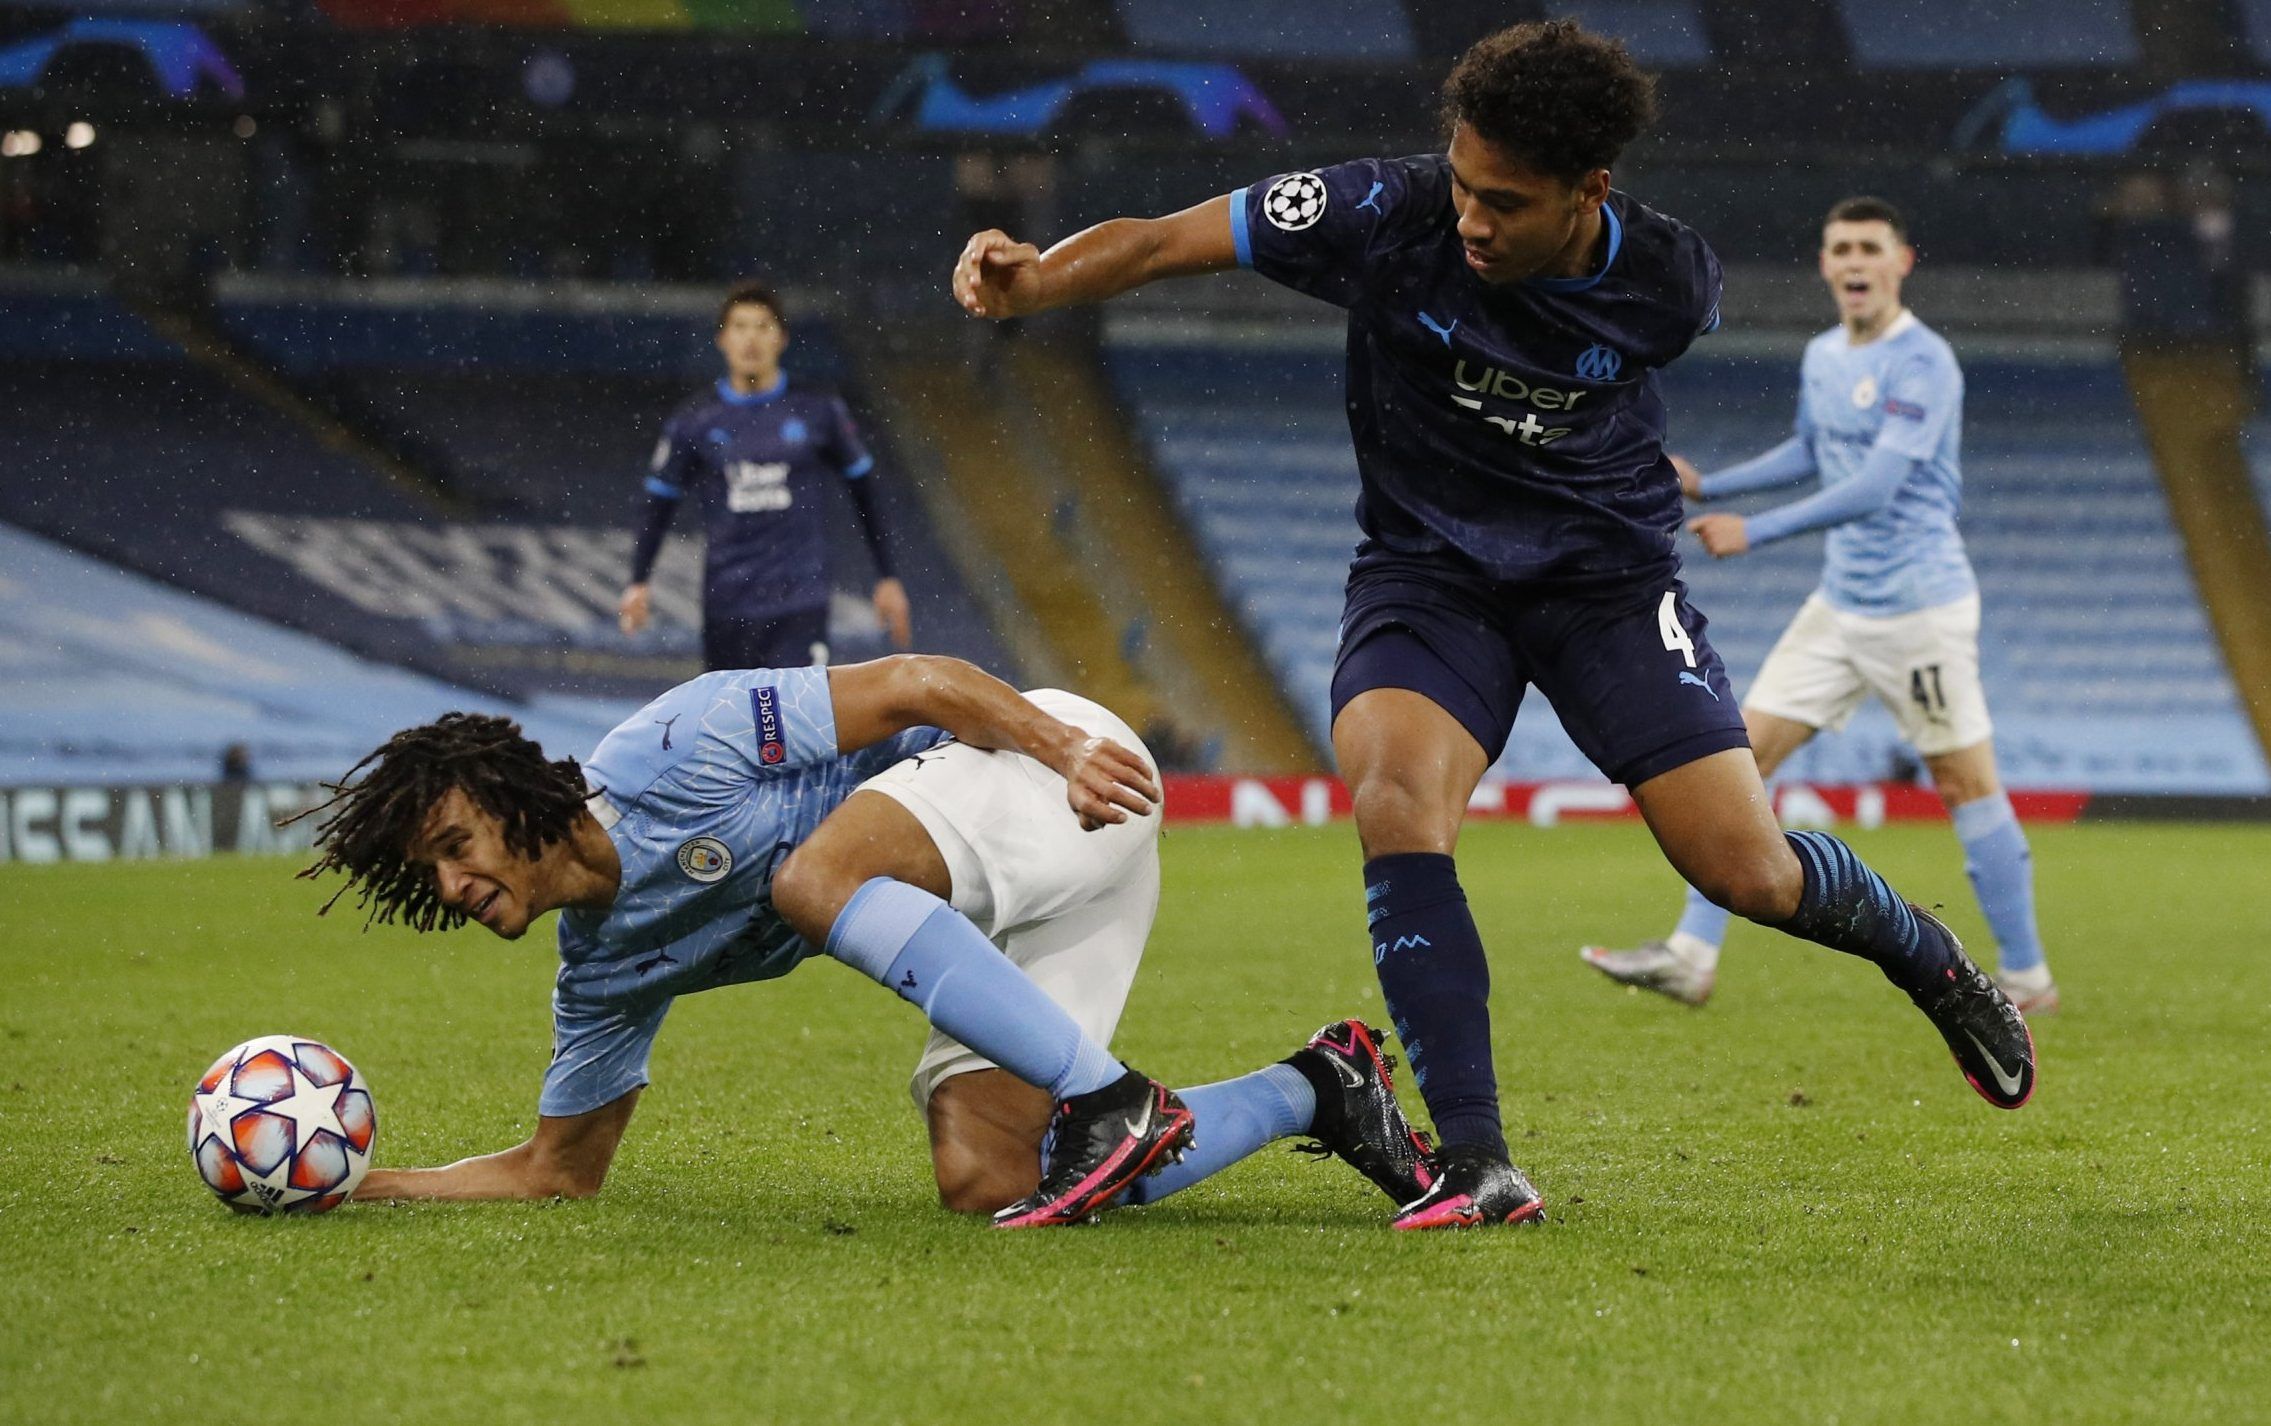 Marseille midfielder Boubacar Kamara in action against Man City's Nathan Ake in the Champions League